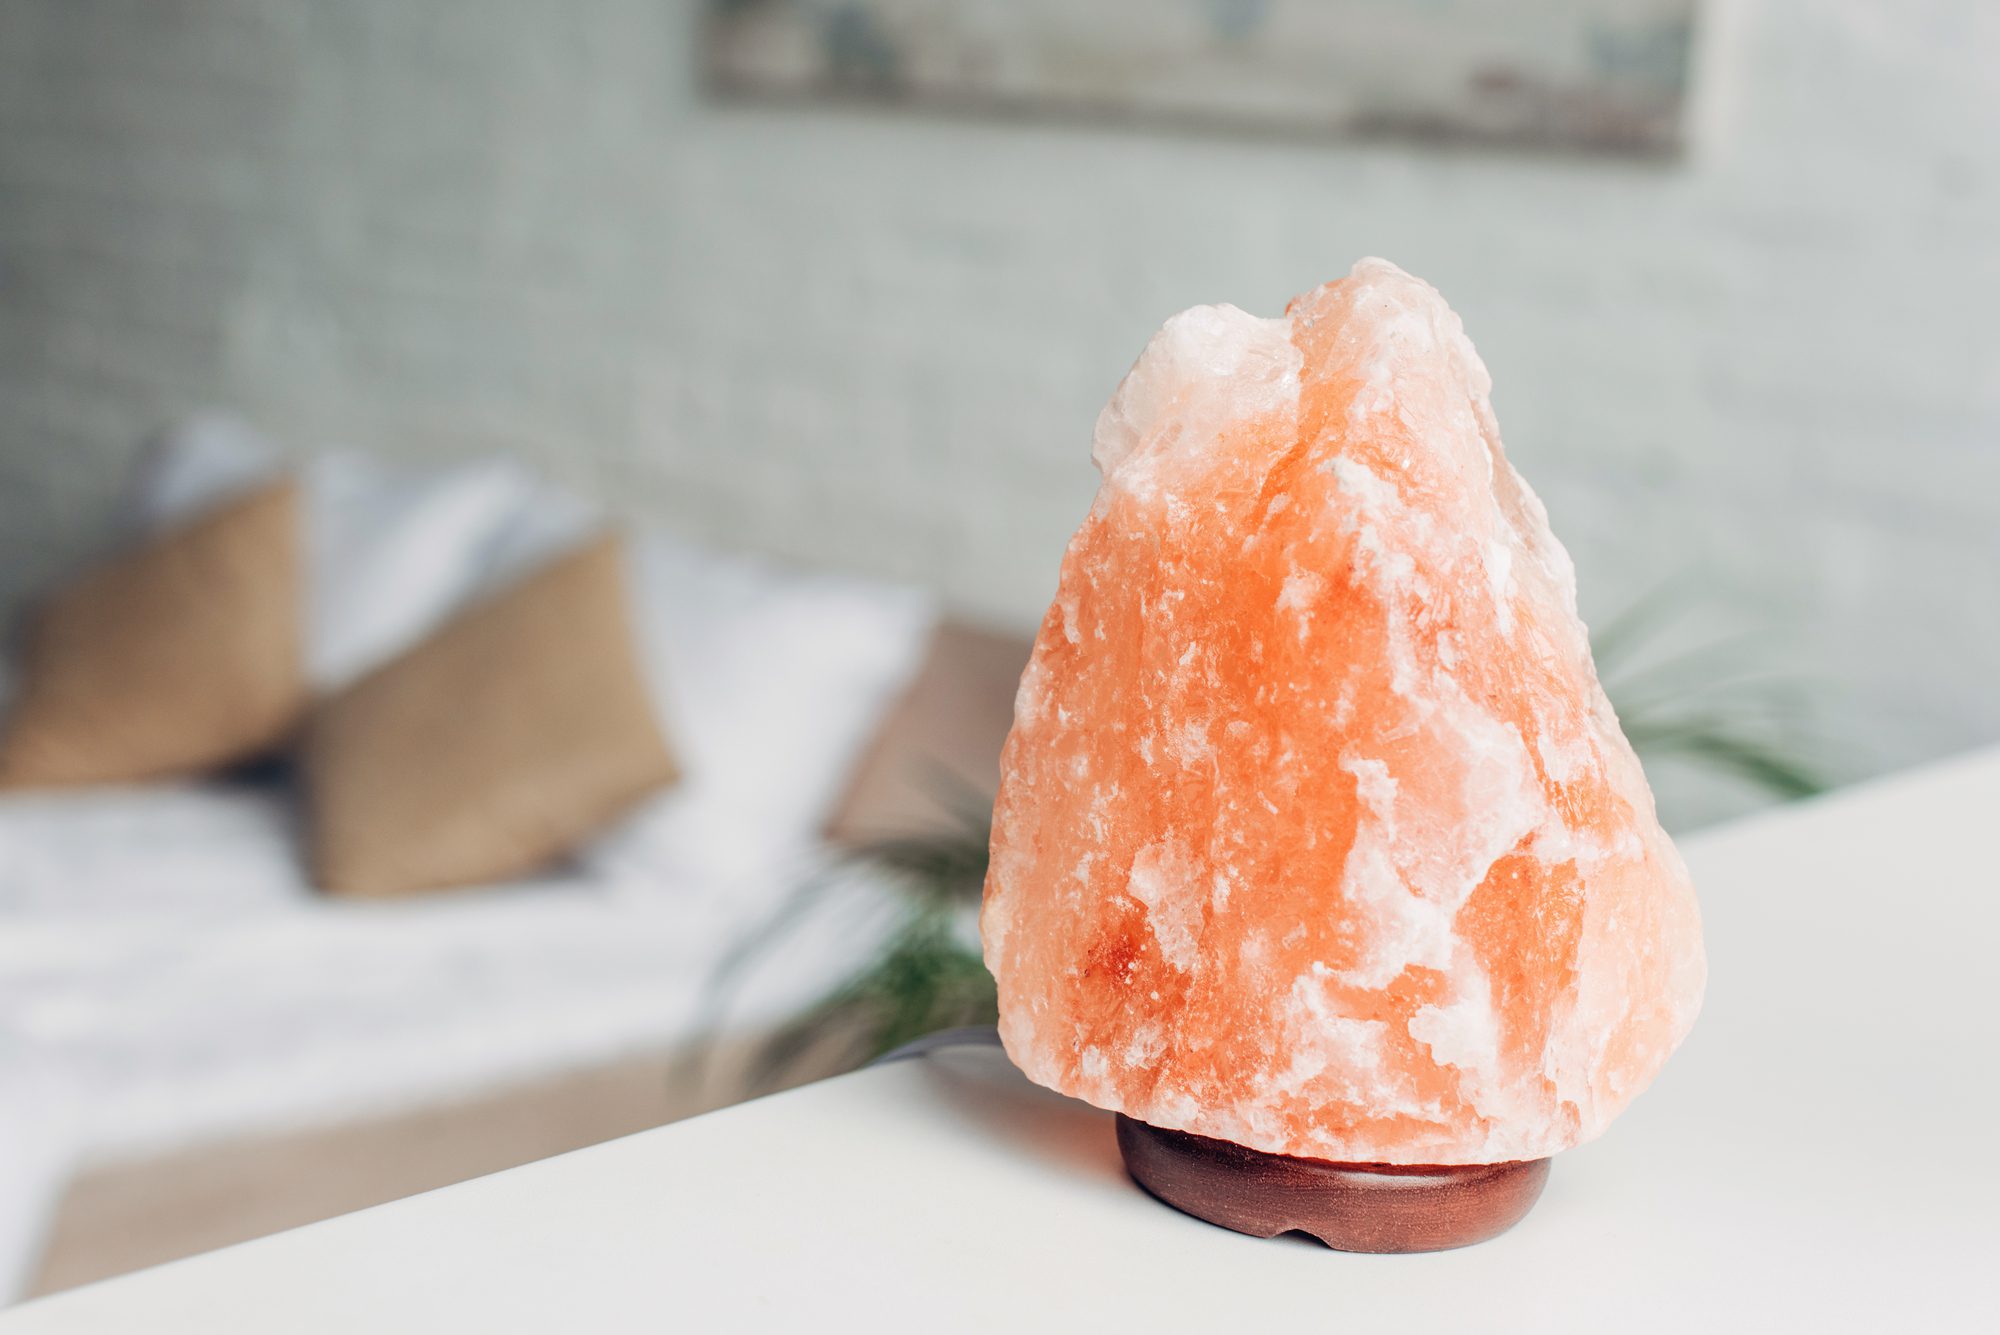 How to choose the best himalayan salt lamps